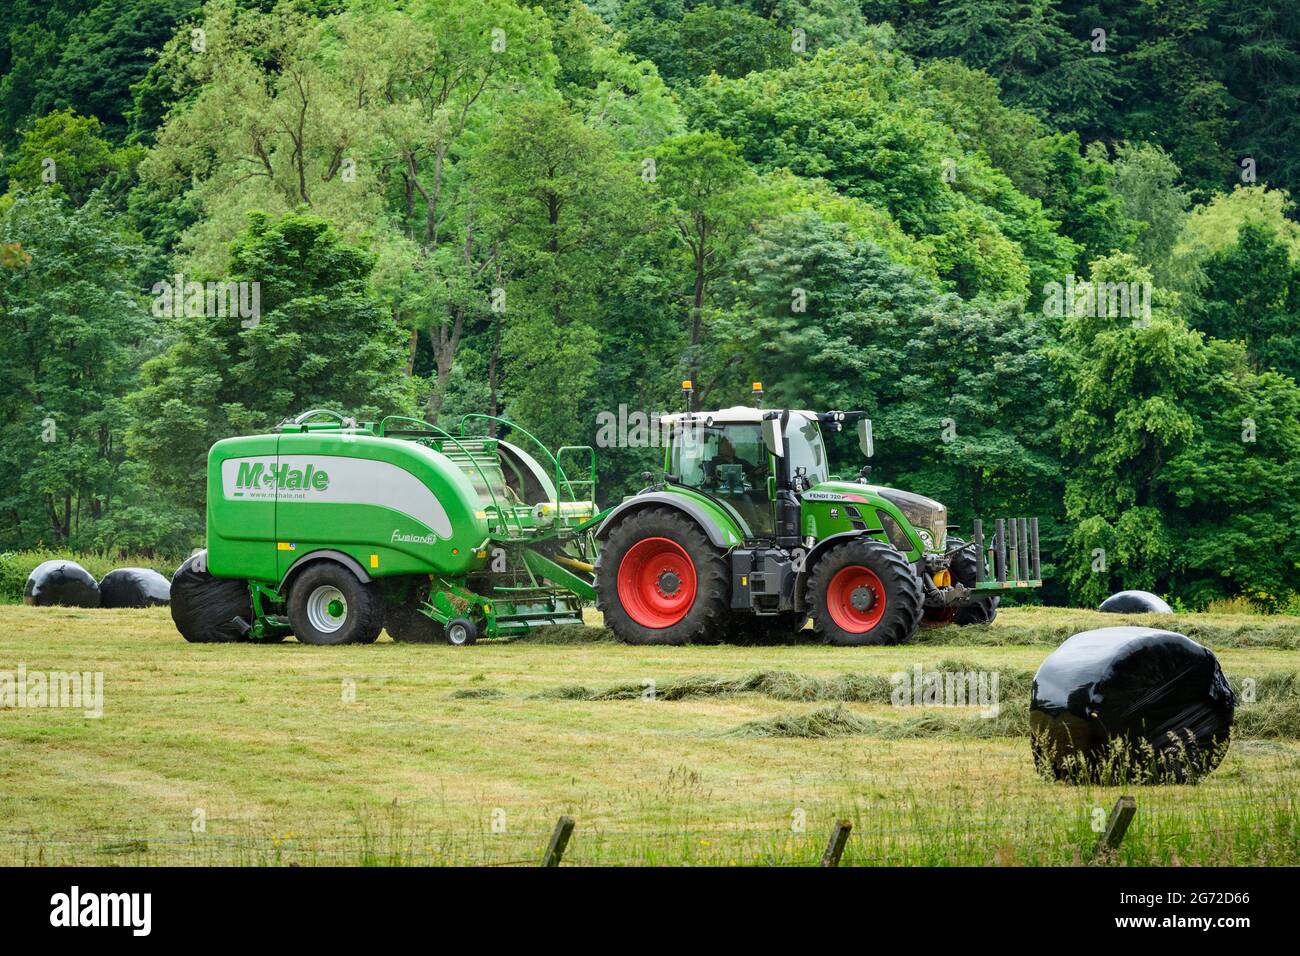 Hay or silage making (farmer in farm tractor at work in rural field pulling baler, collecting dry grass & round bales wrapped) - Yorkshire England UK. Stock Photo